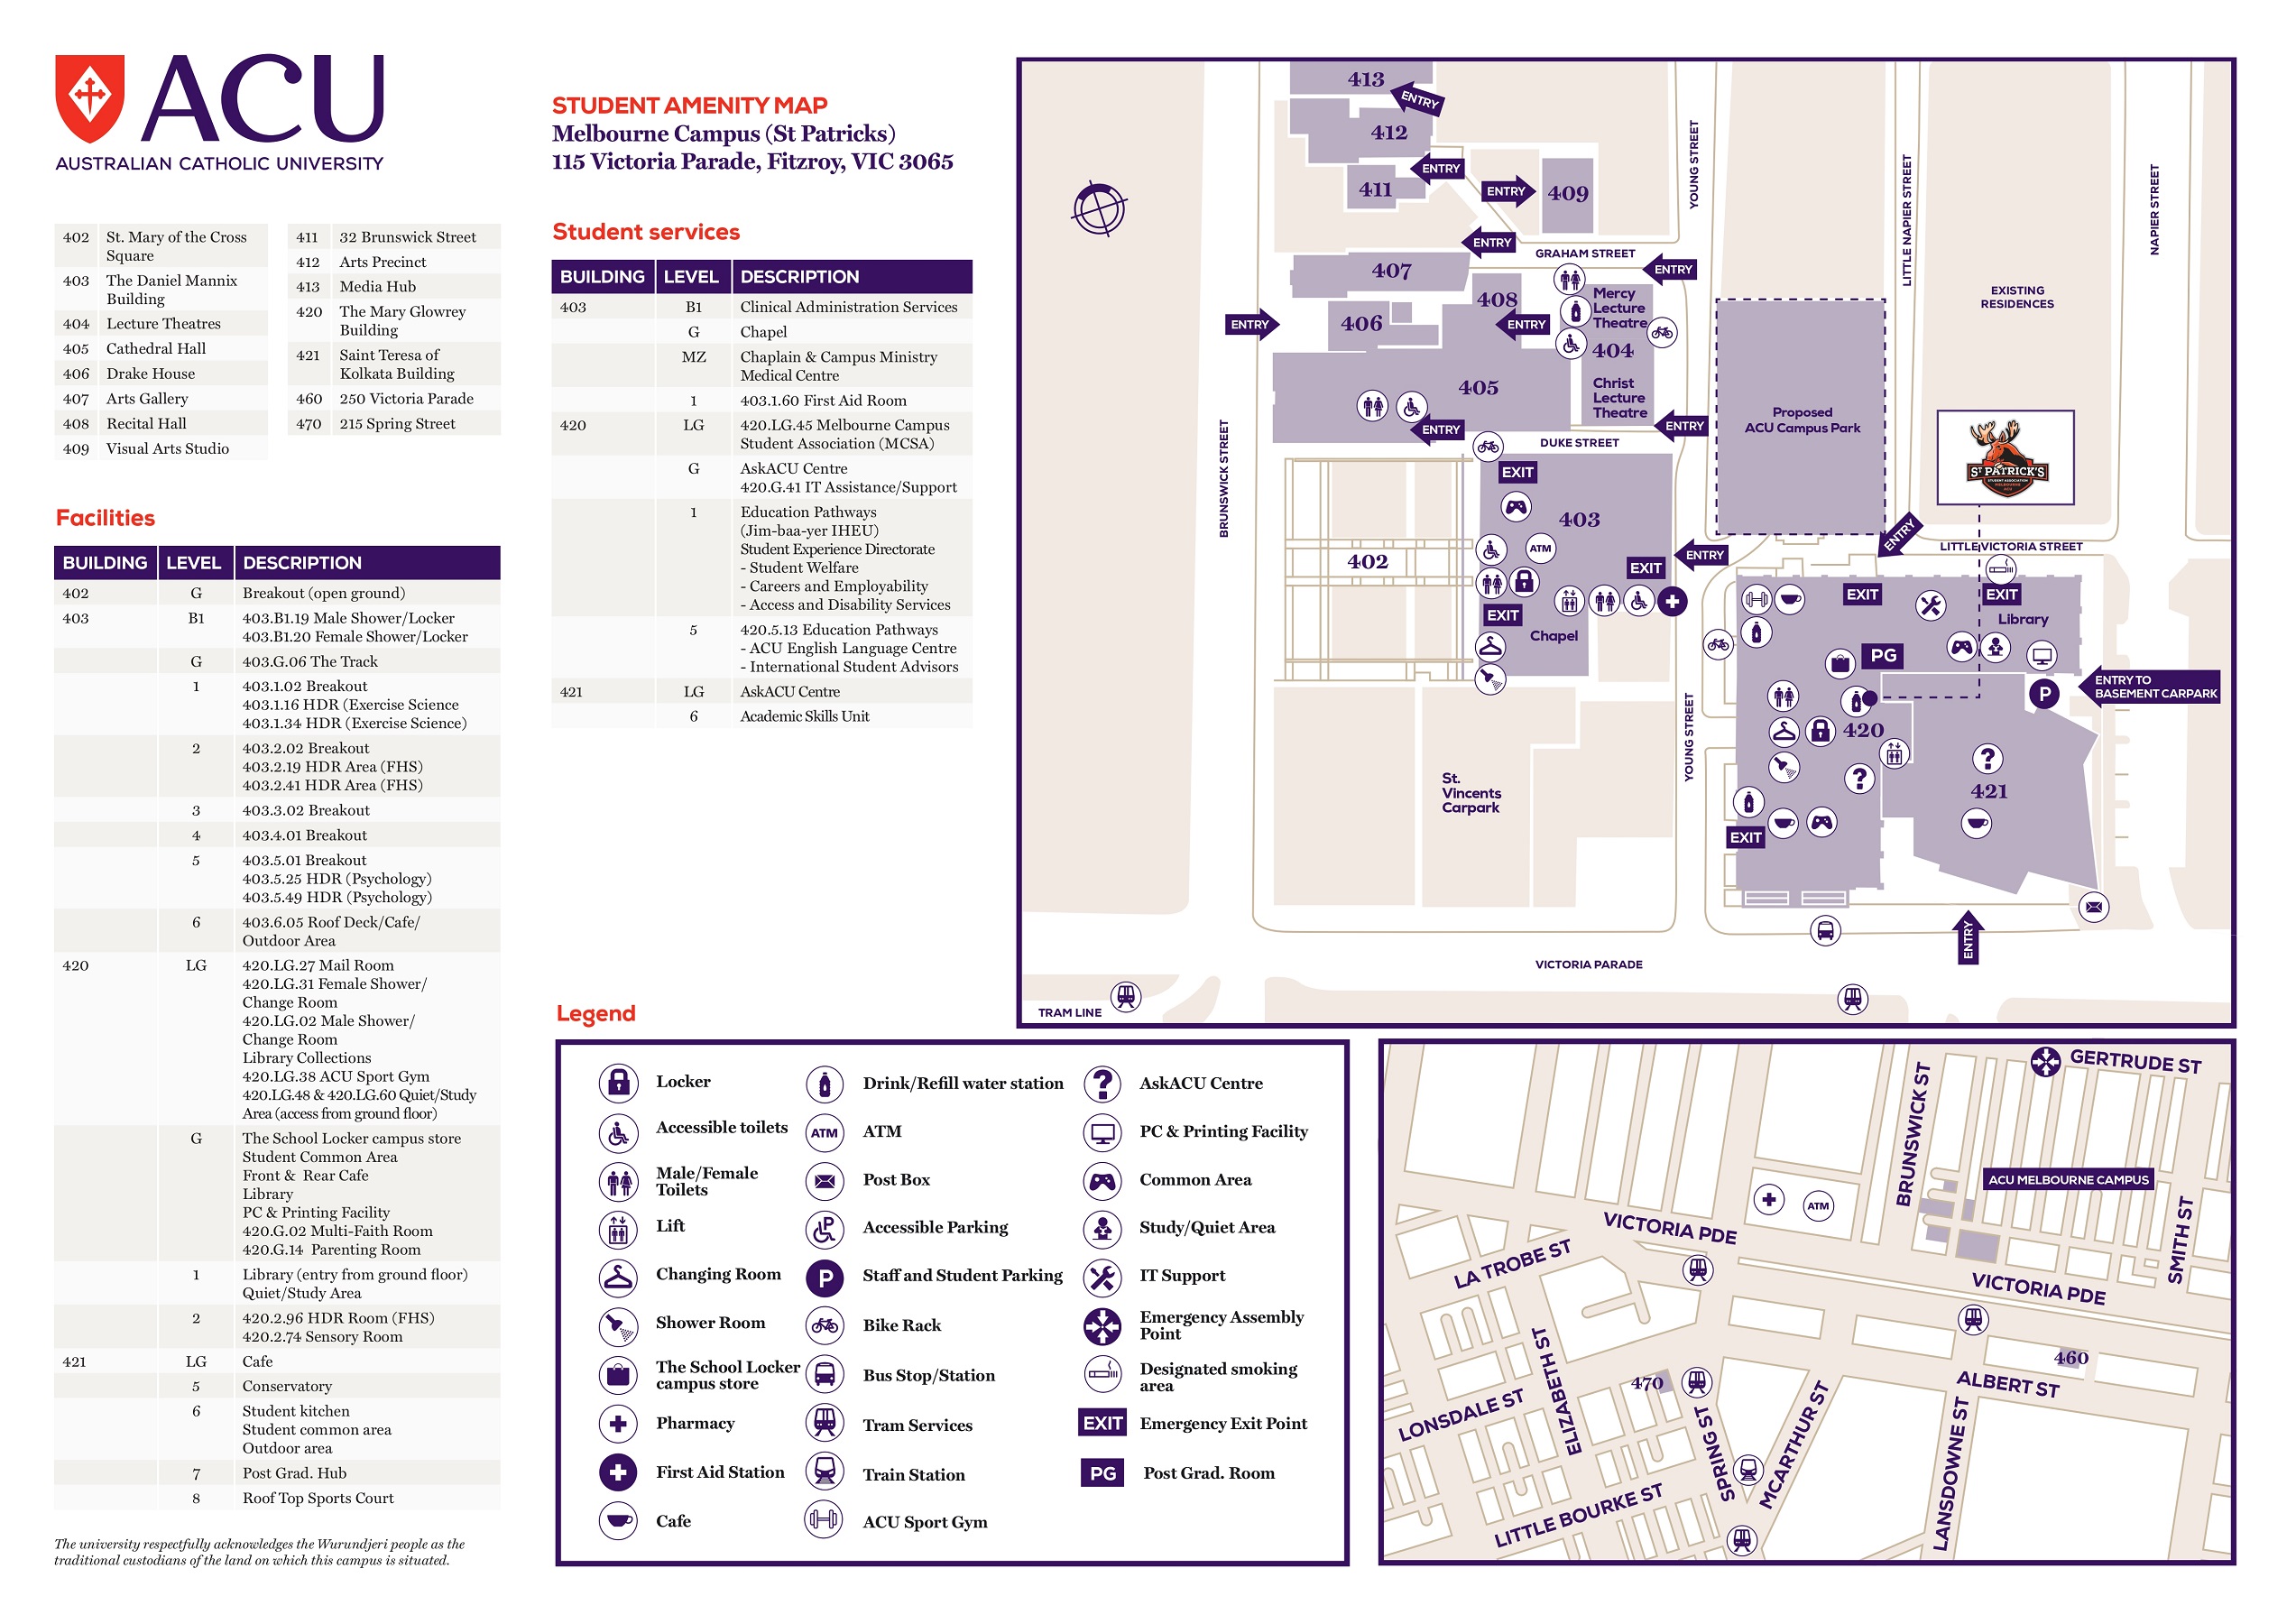 map of Melbourne campus amenity map